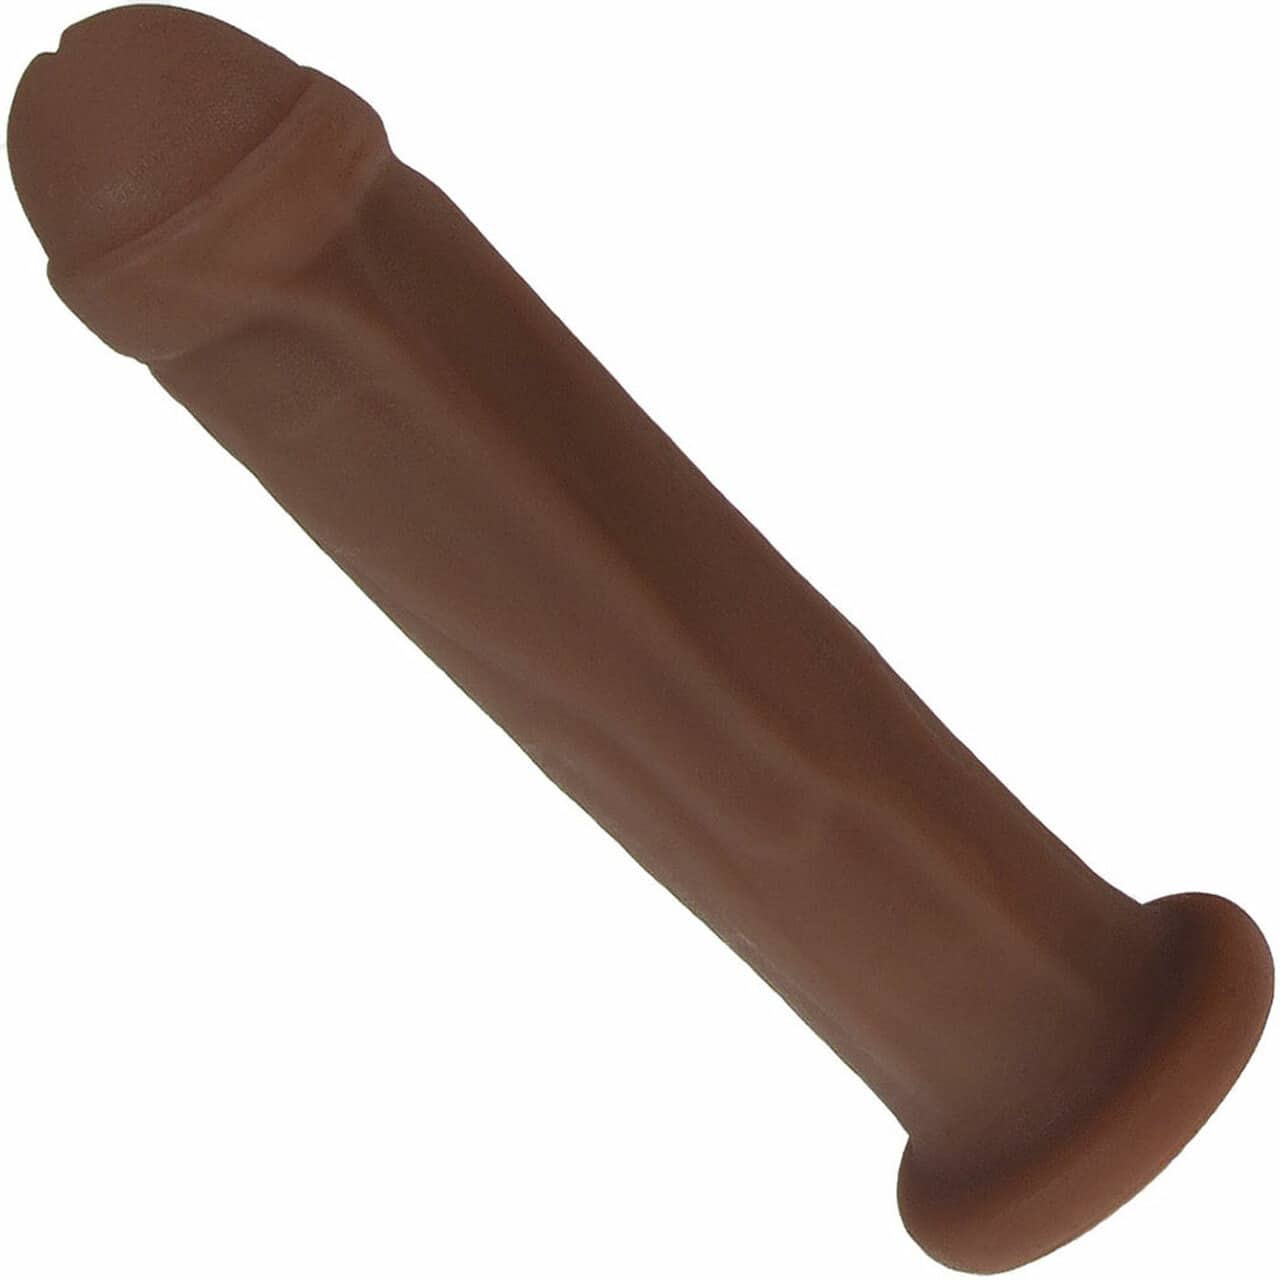 New York Toy Collective Leroy Uncut Dildo . Slide 2